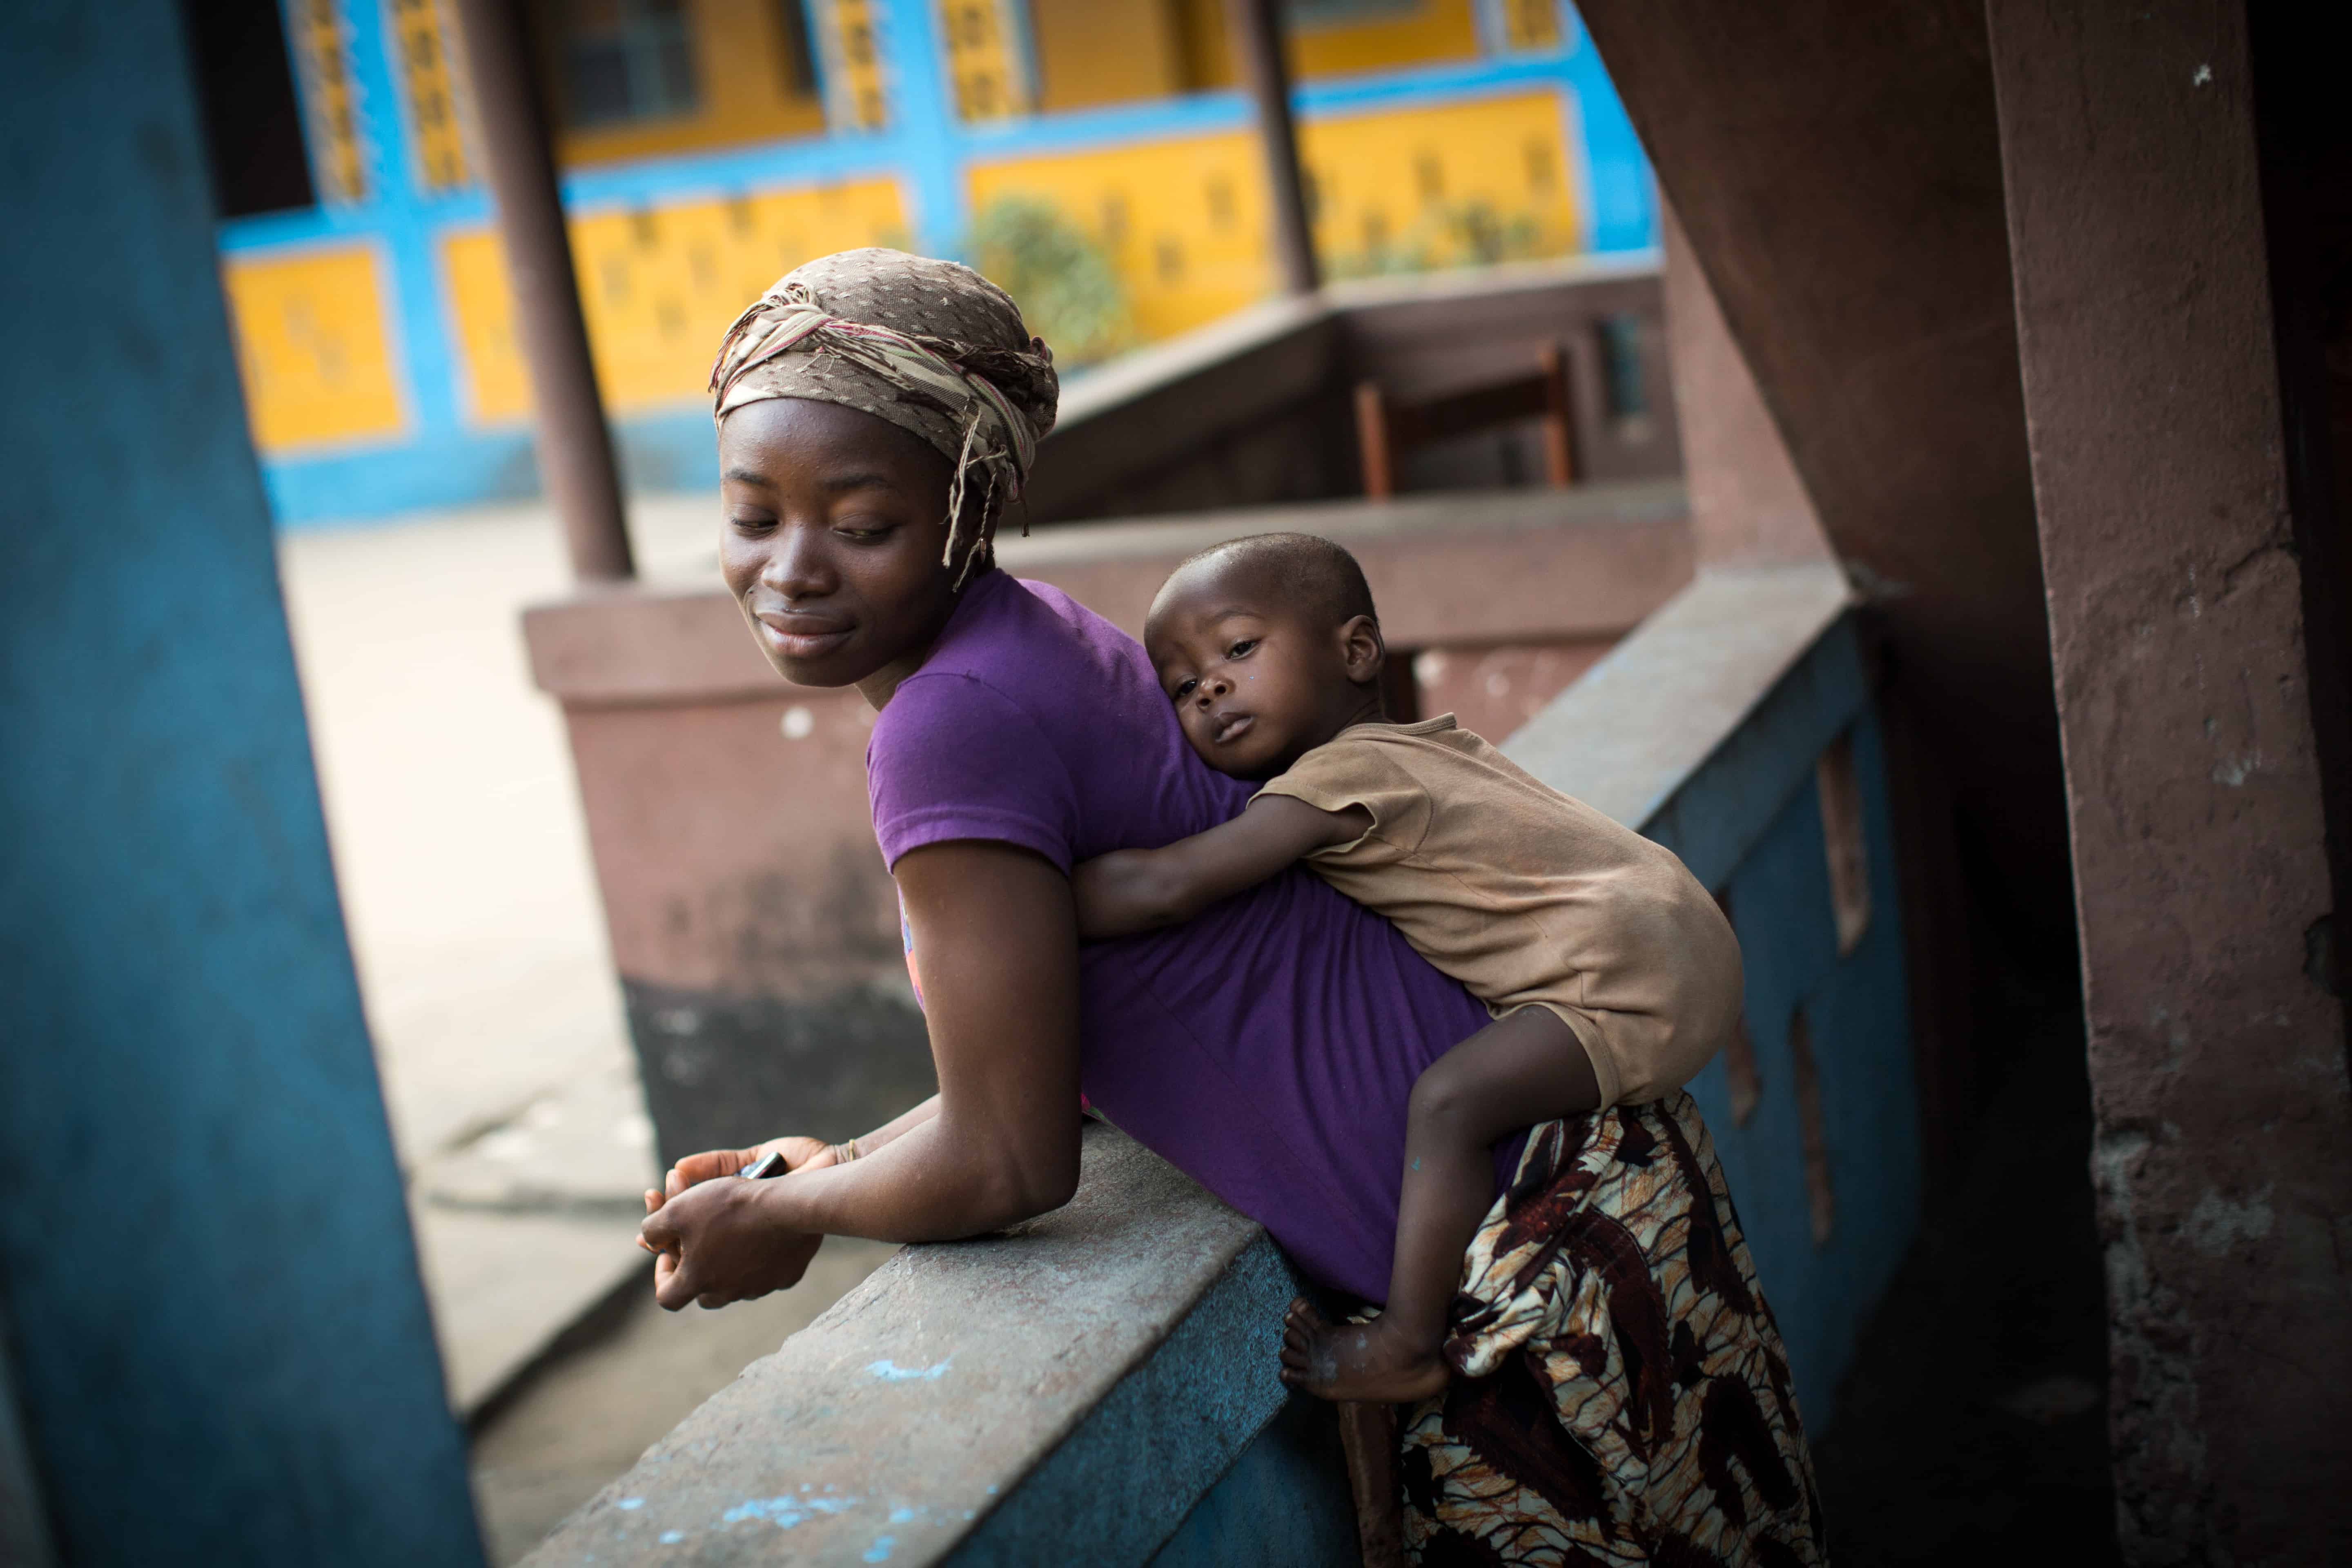 New KruTown, Monrovia. Community members that have taken had their babies at or taken their children to Redemption Hospital for treatment. Monrovia/Liberia. Photo Robin Hammond/Panos